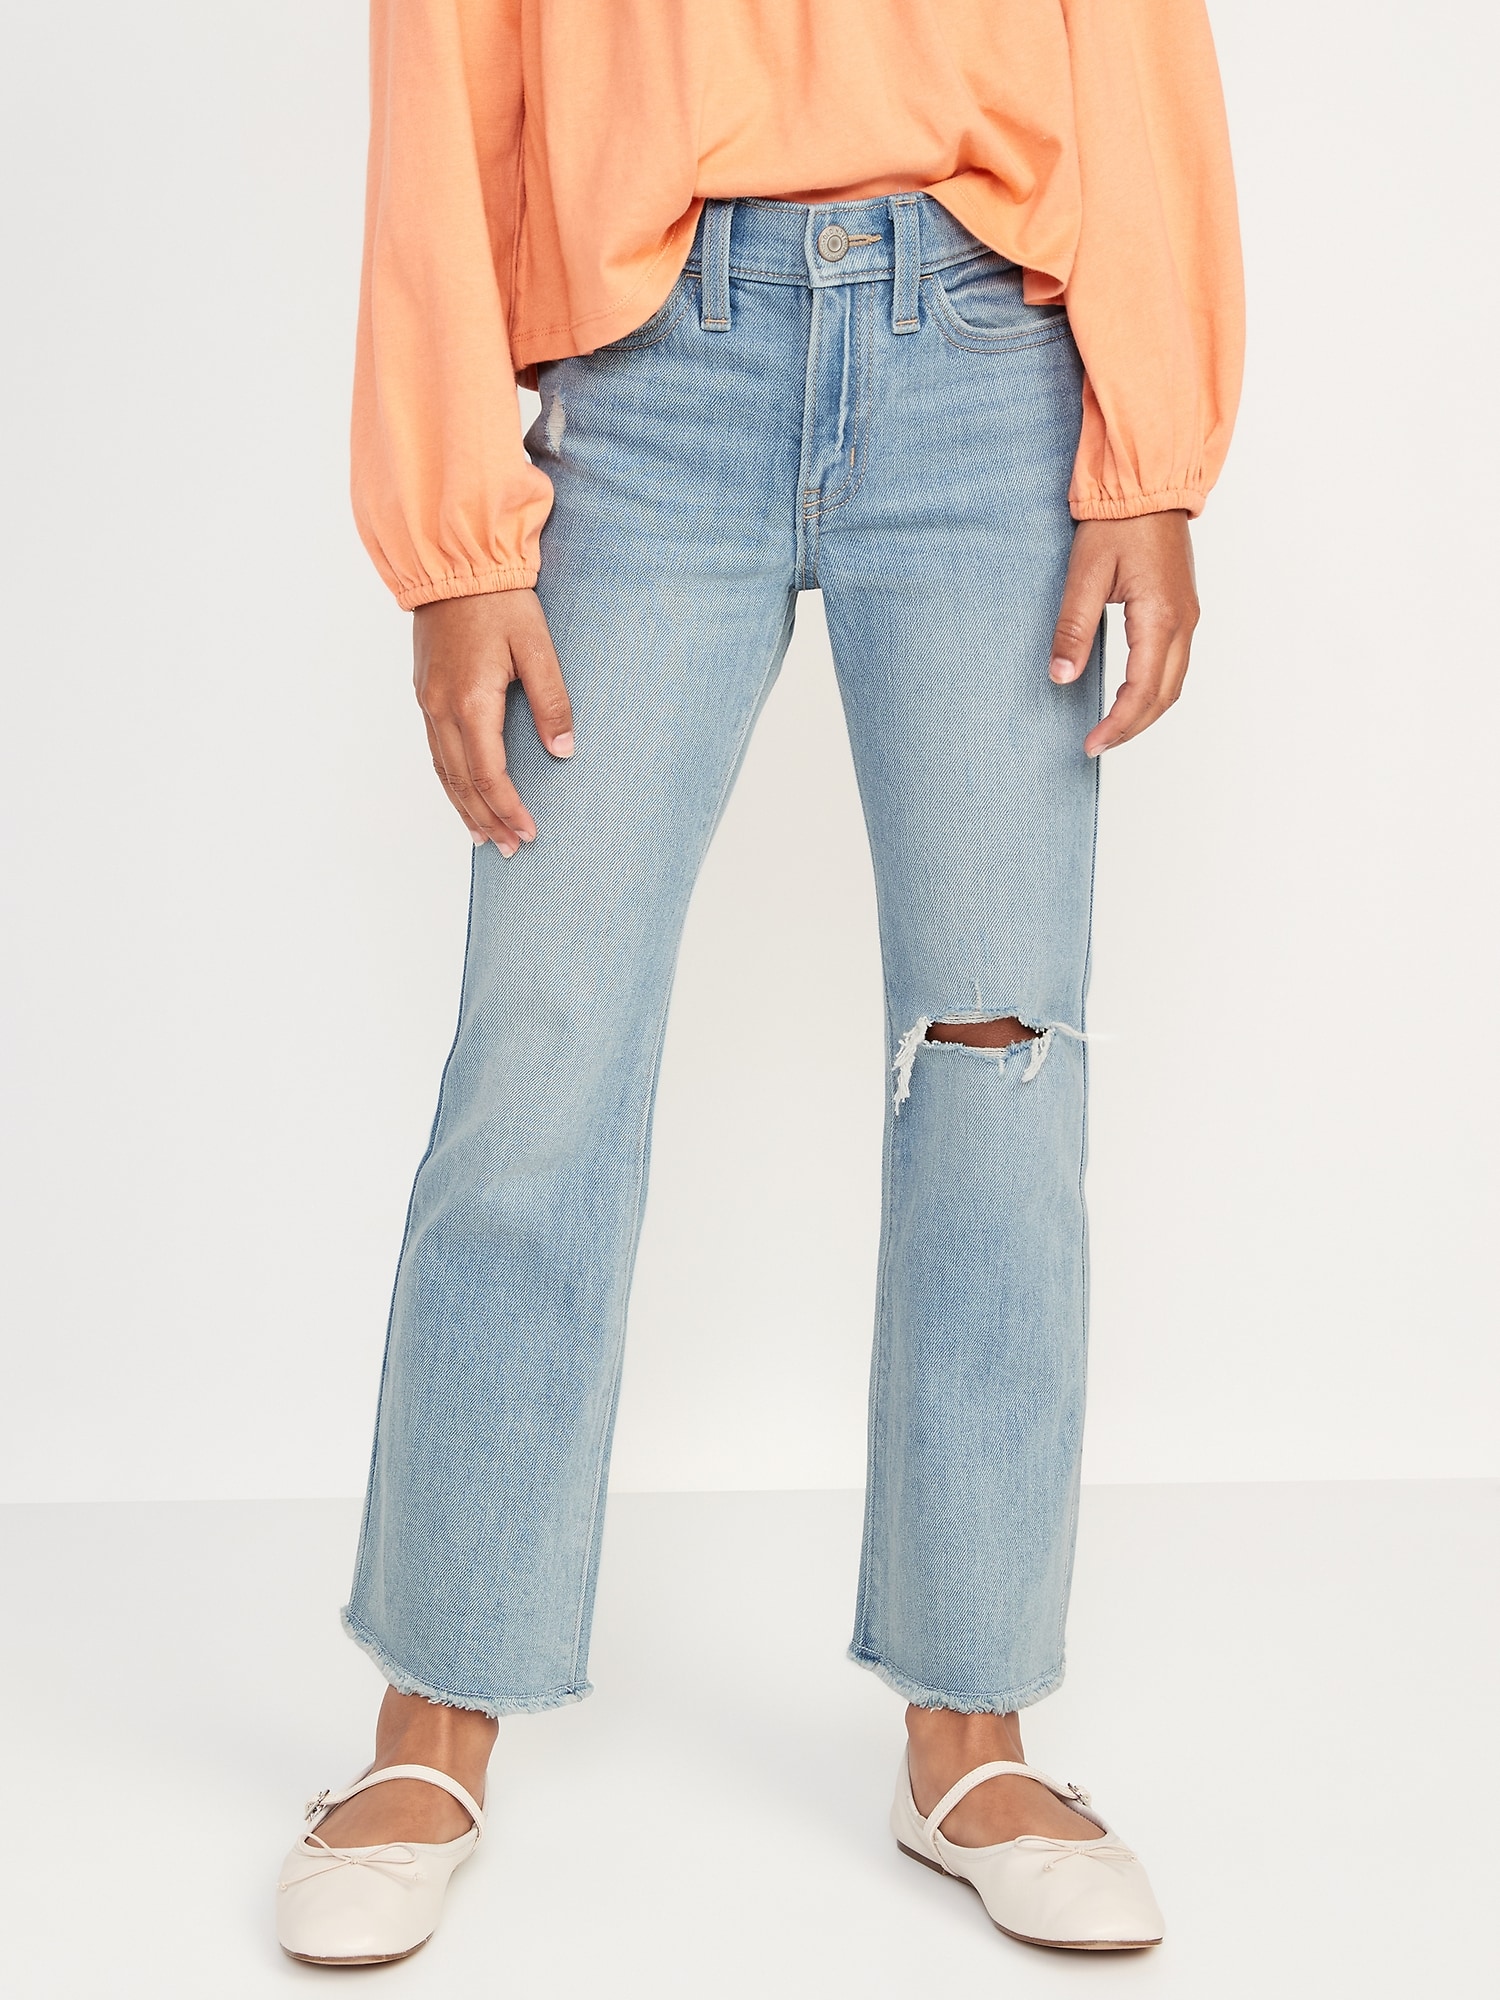 Jeans Pant Ripped Flare Female  High Waist Flare Ripped Jeans